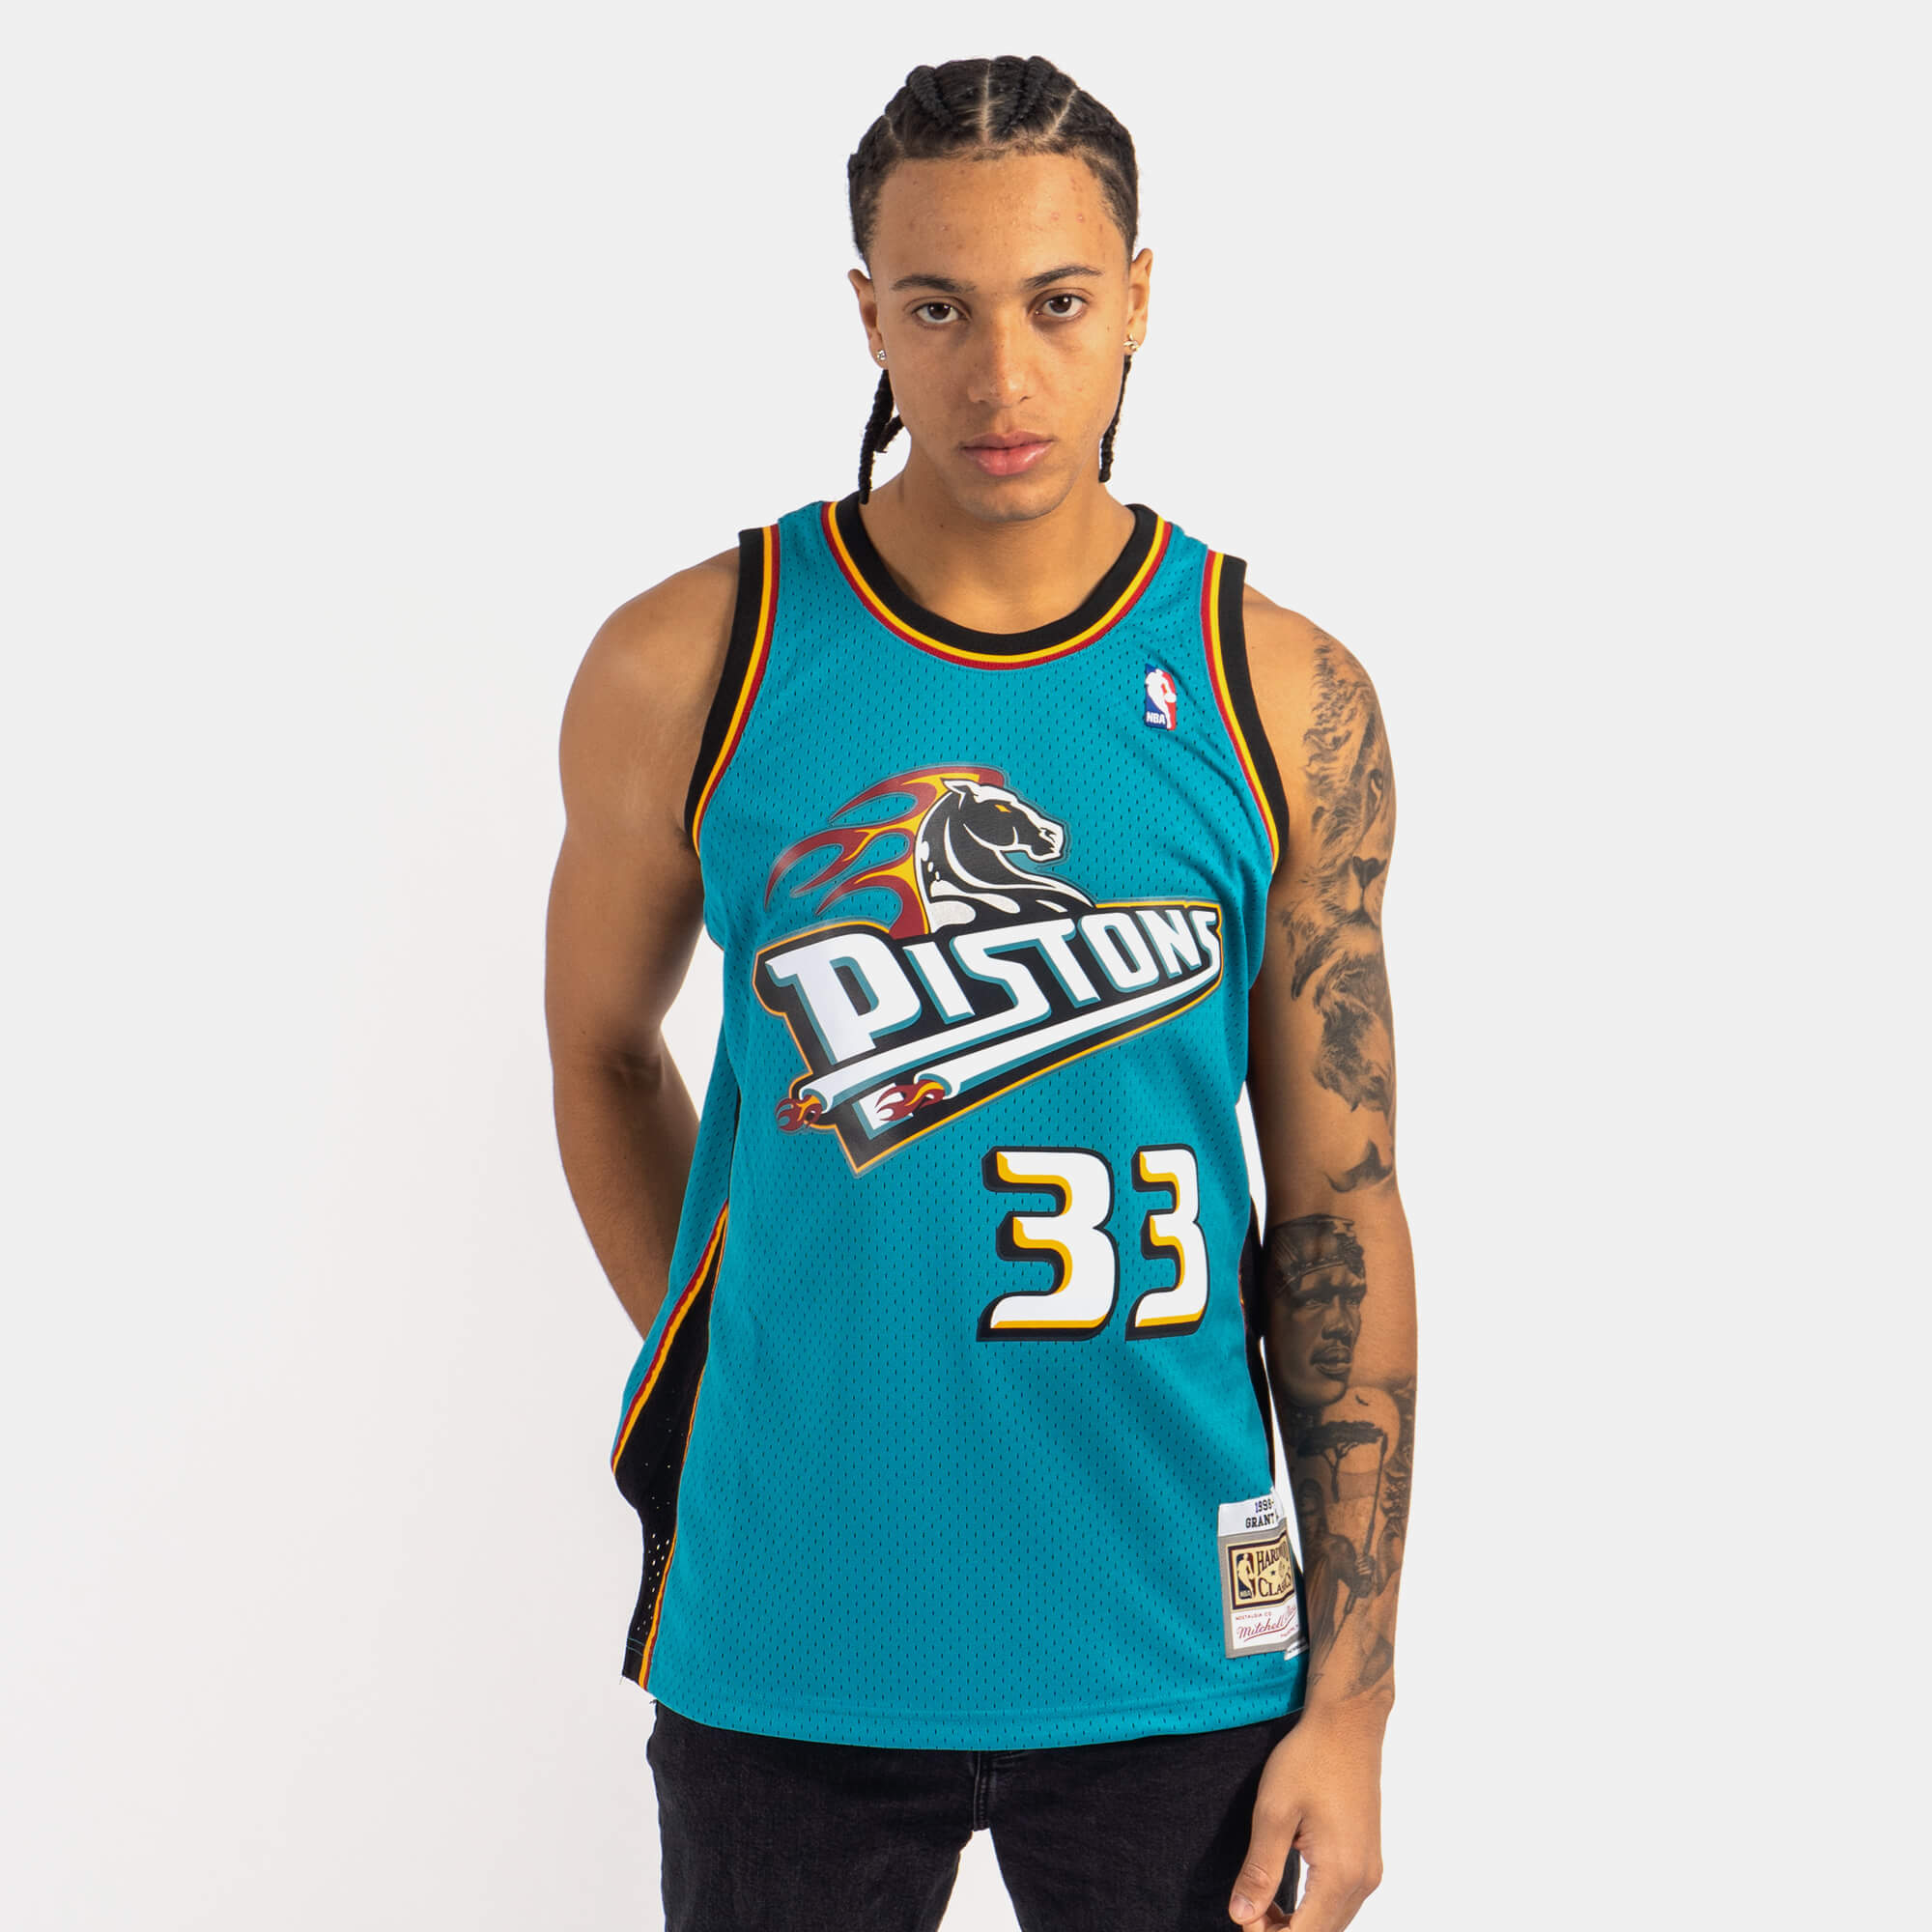 teal grant hill jersey